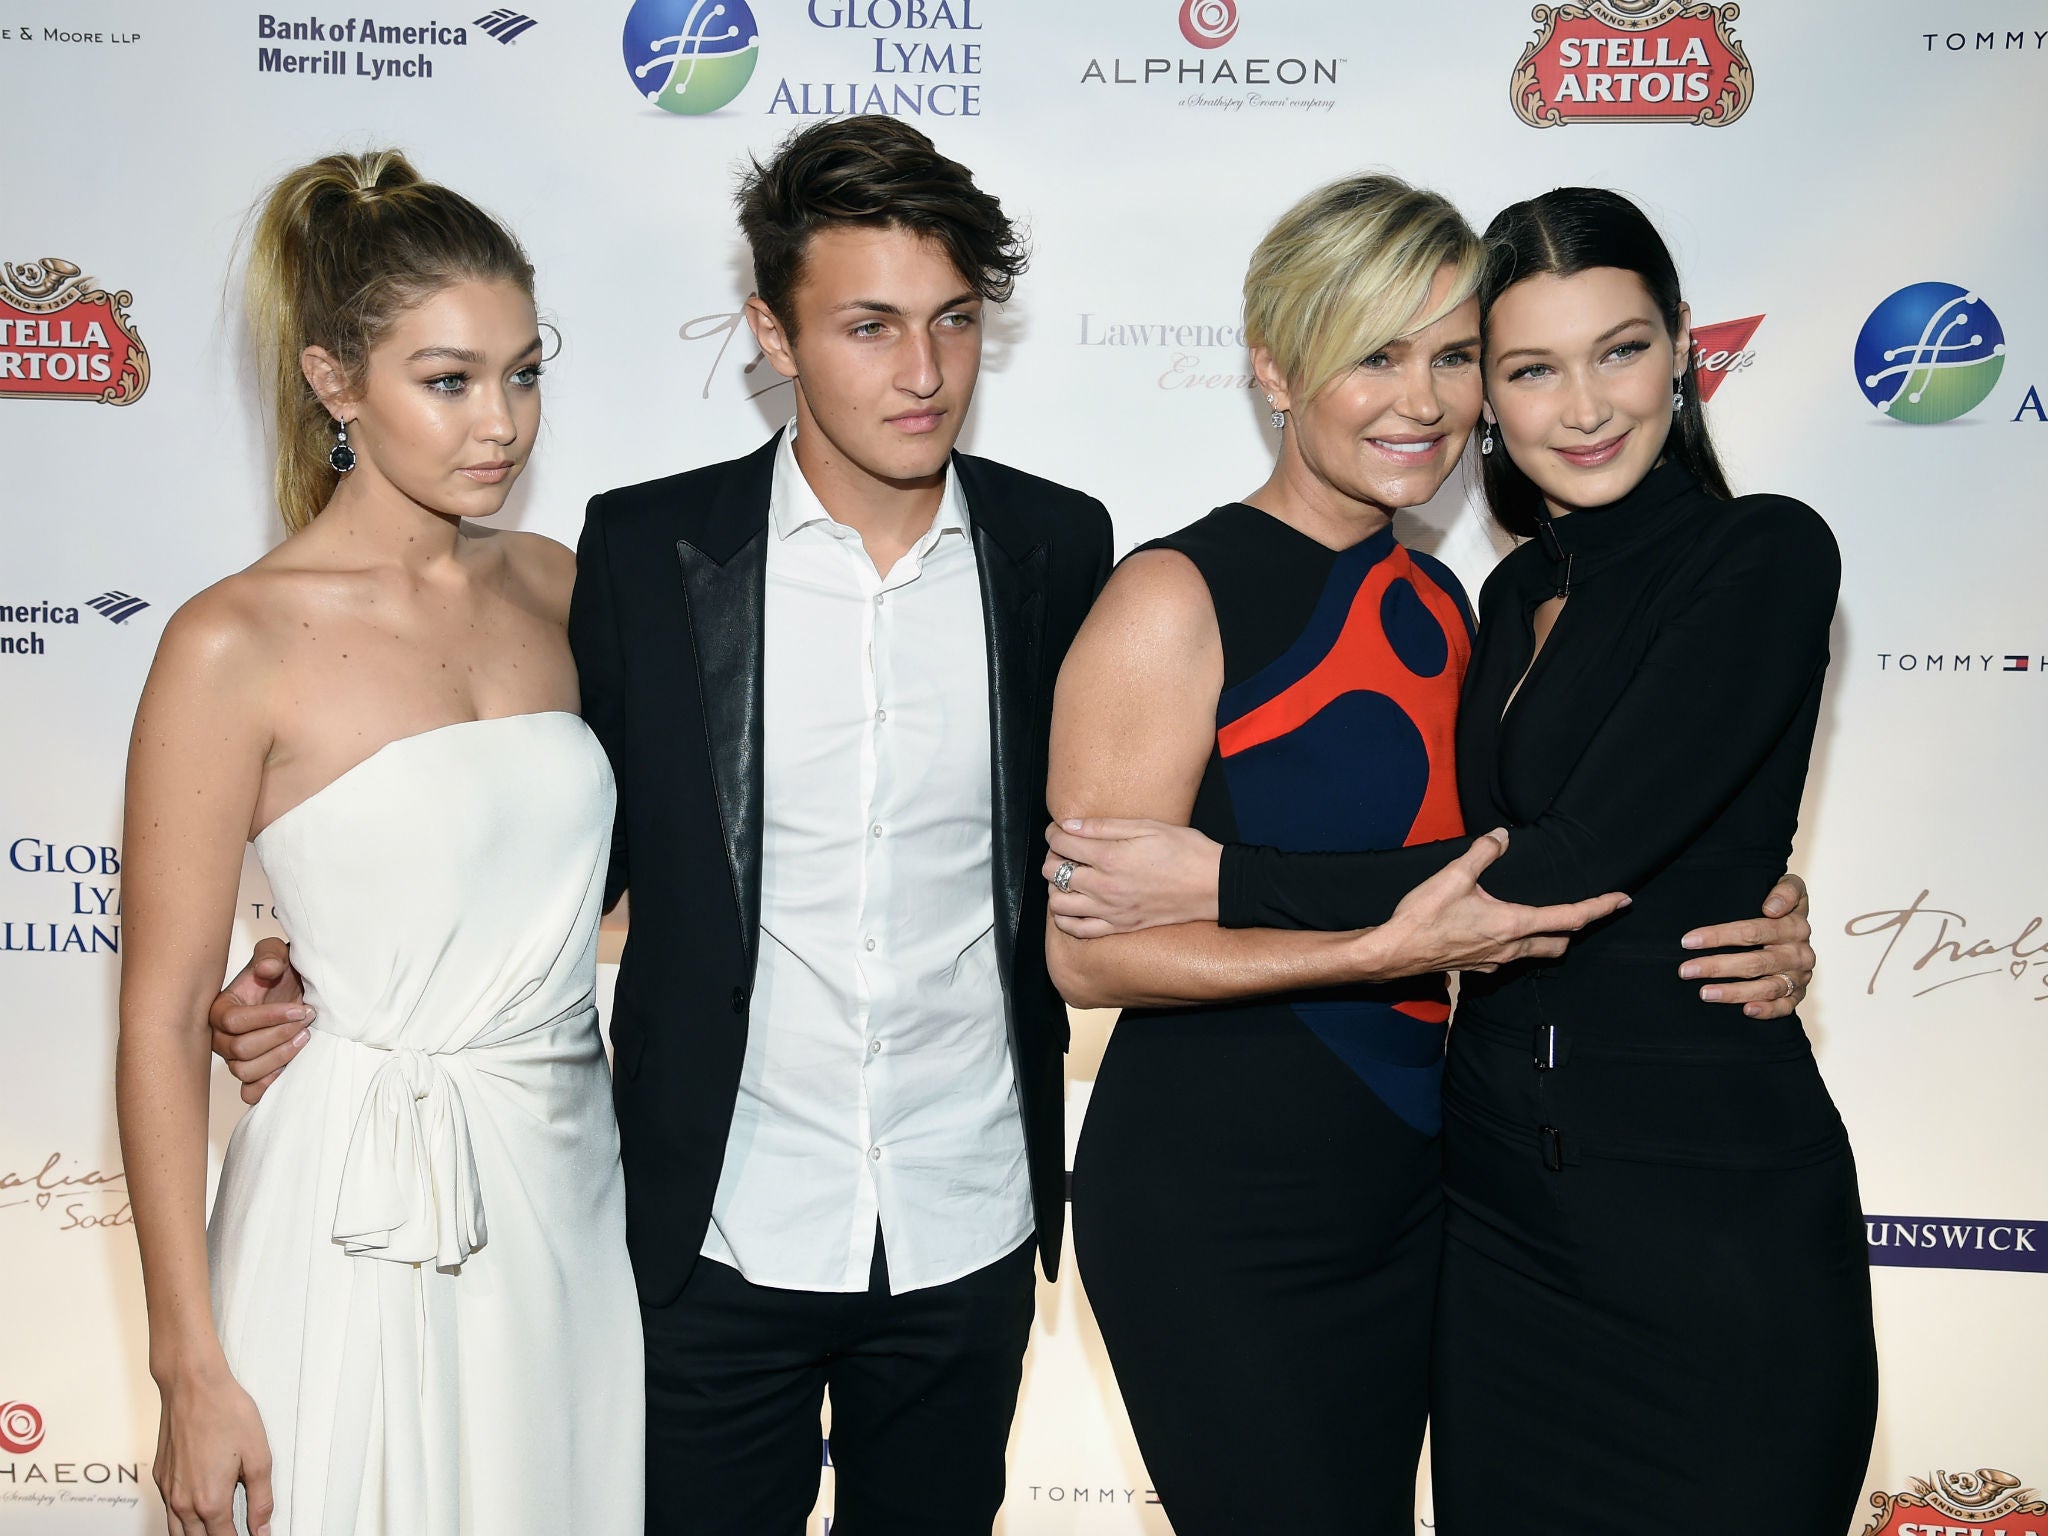 Anwar Hadid is set to follow his sisters into the modelling world